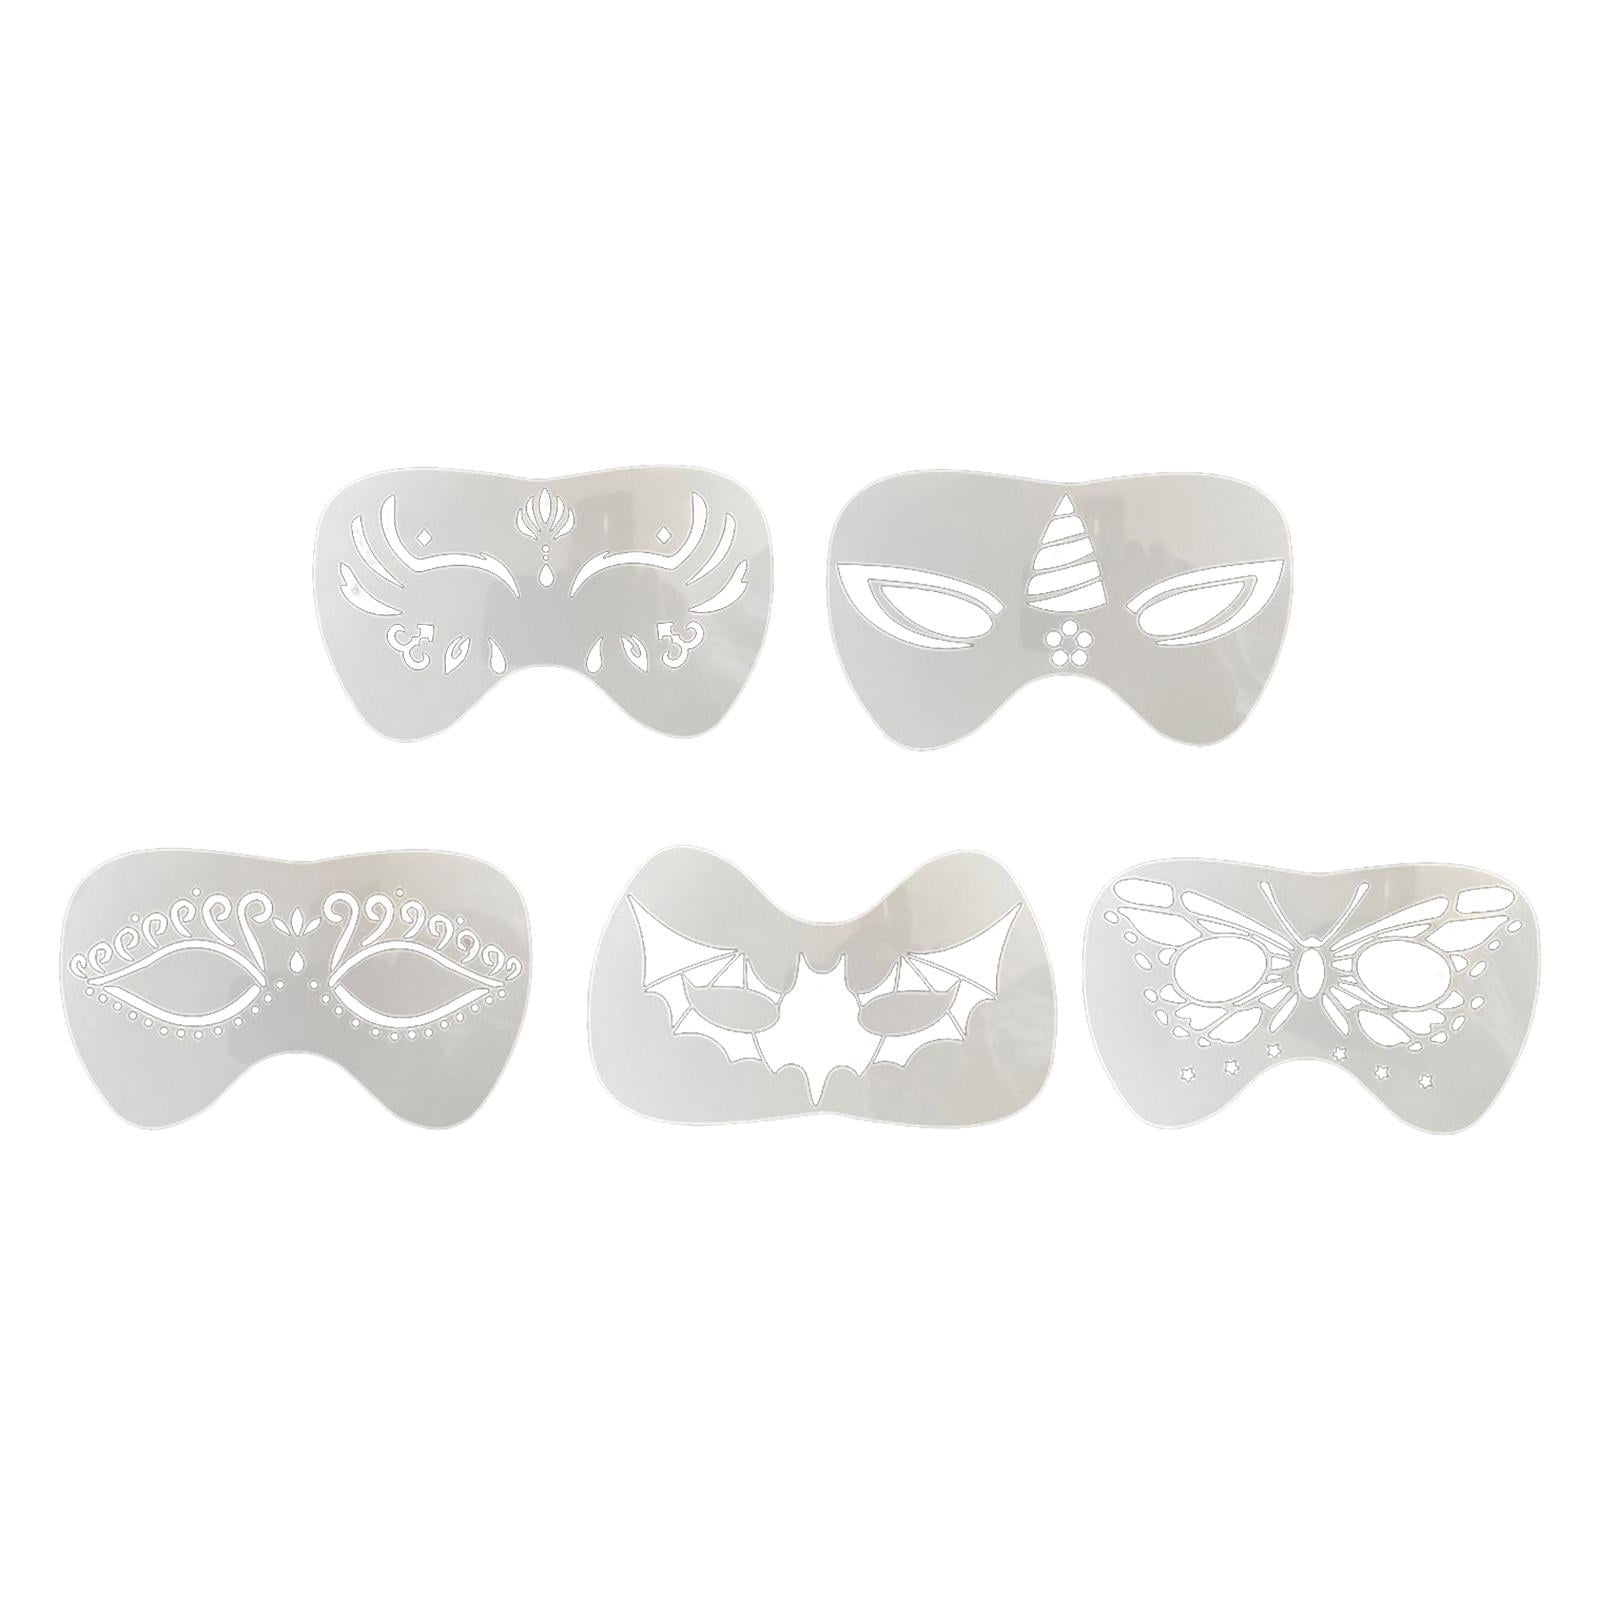 Face Paint Stencils Set Makeup Art Painting Premium Material for Kids  Smooth Half Face Use 